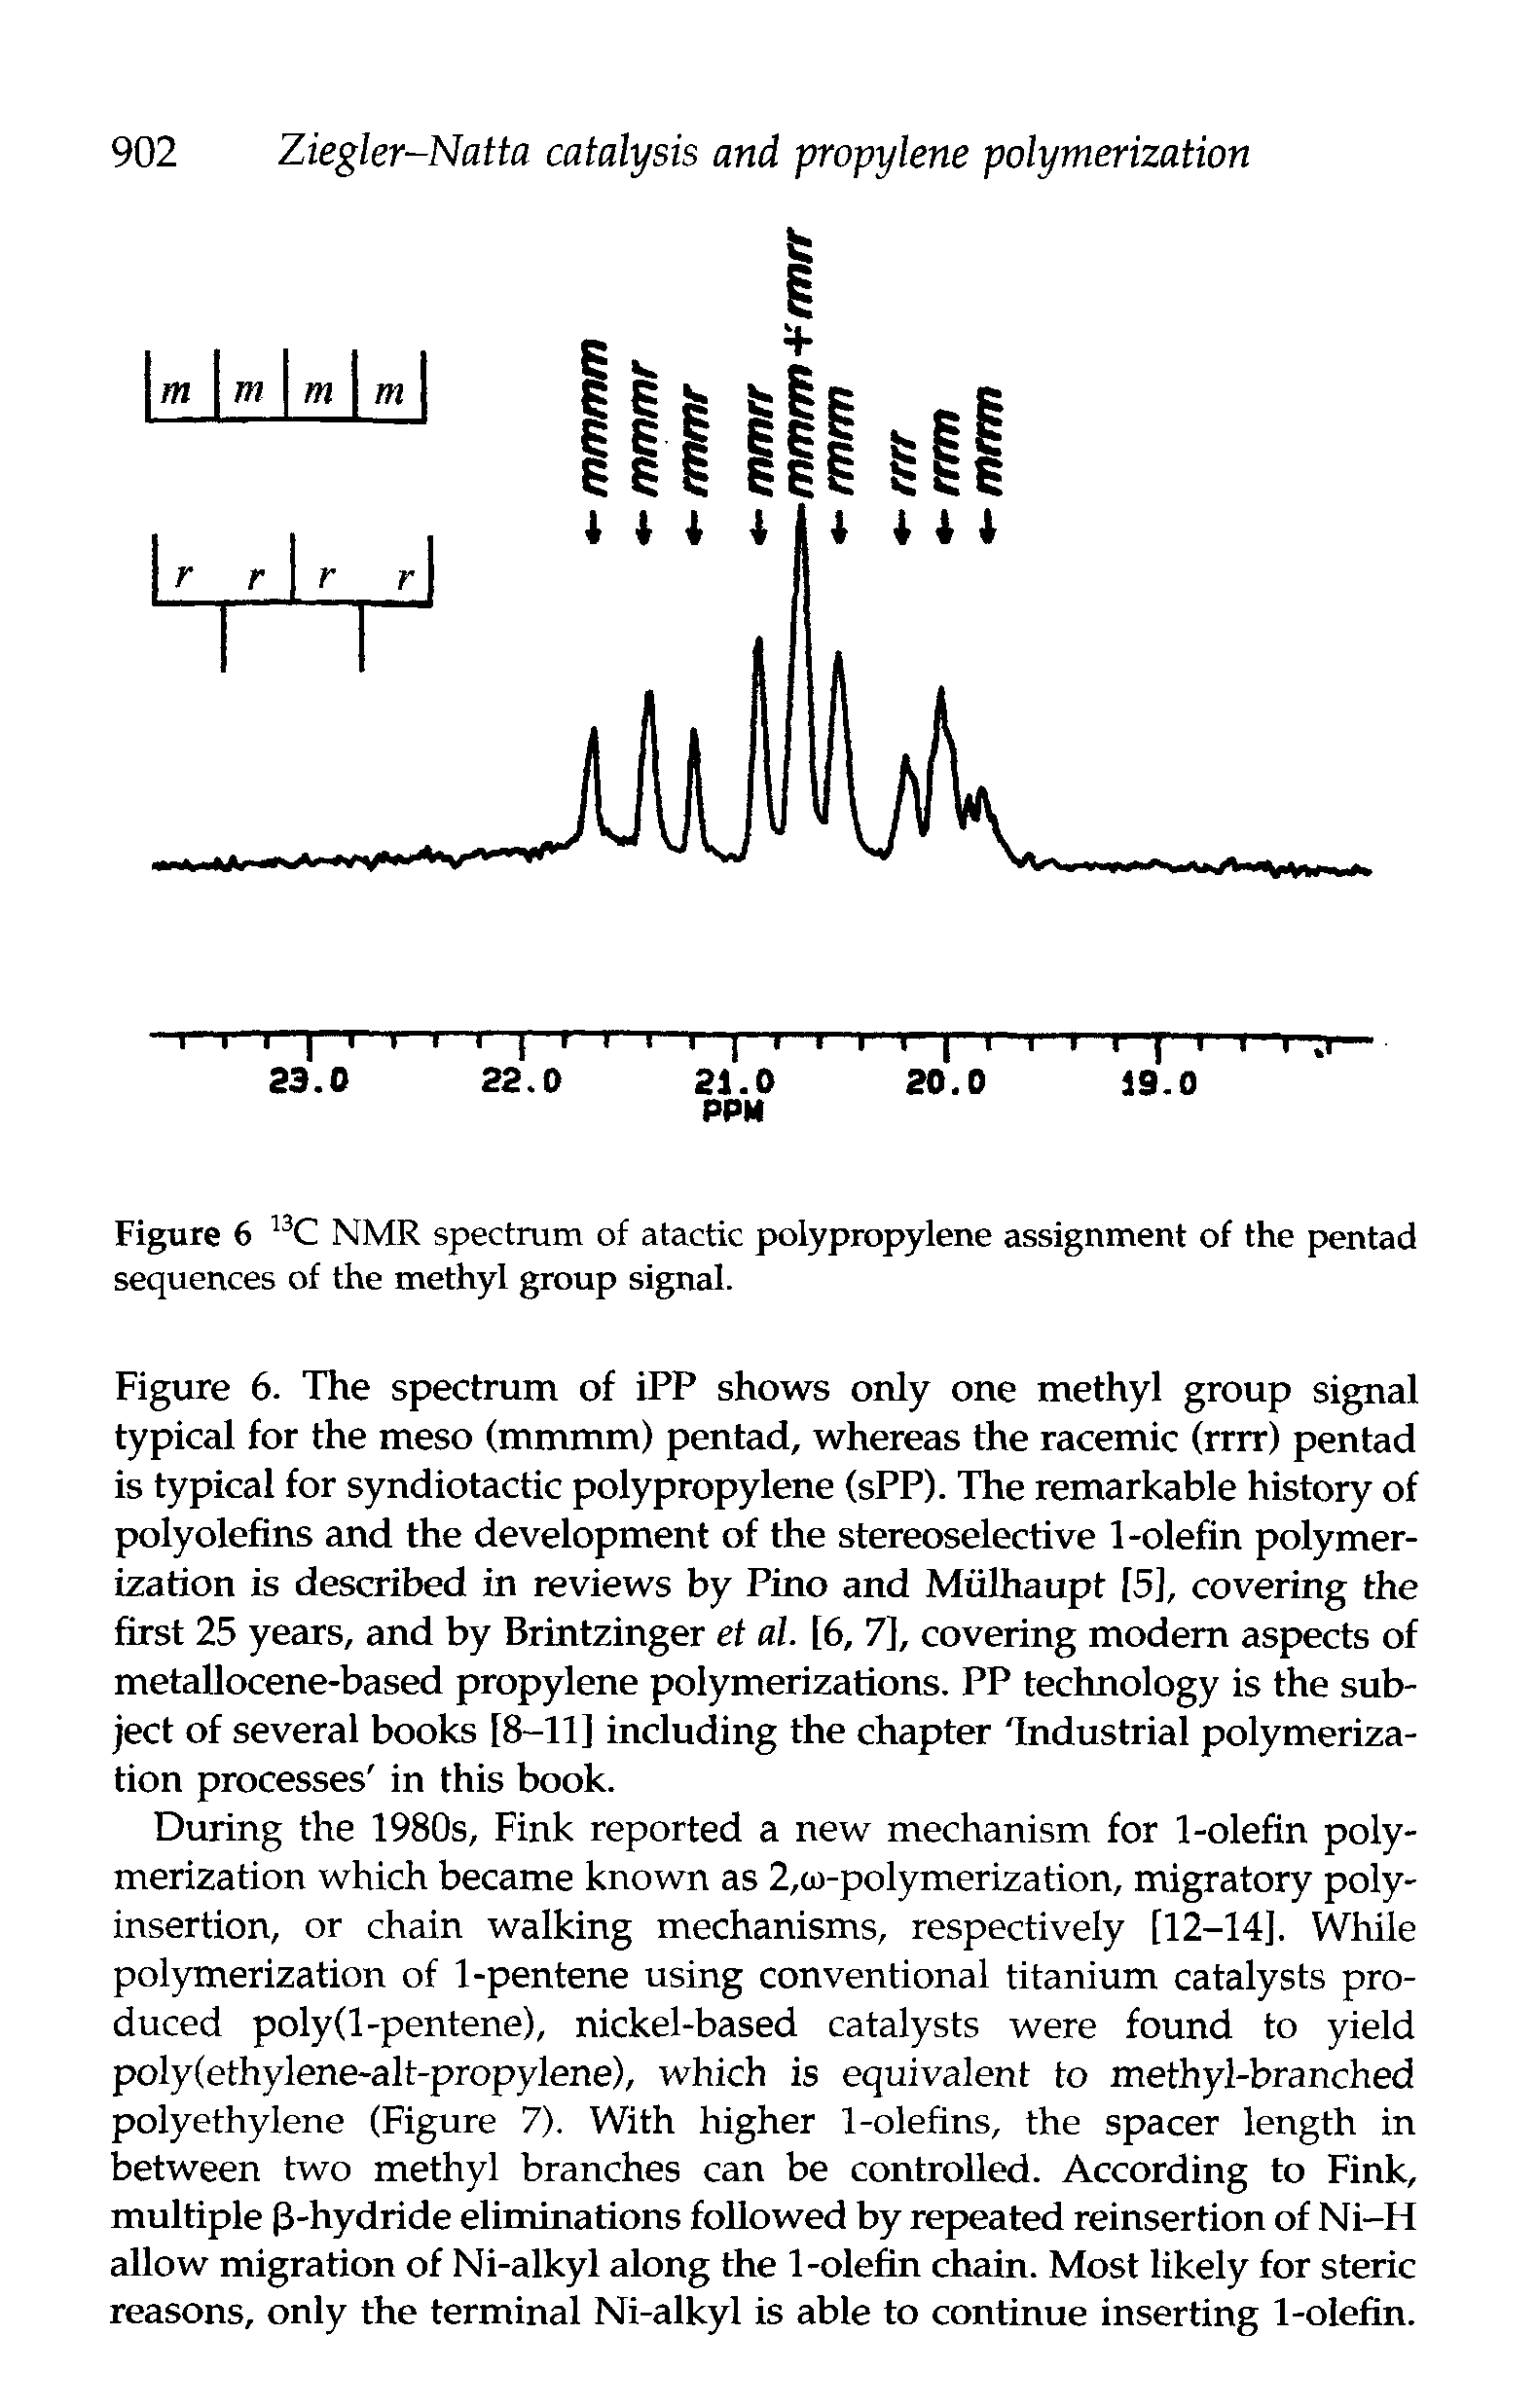 Figure 6. The spectrum of iPP shows only one methyl group signal typical for the meso (mmmm) pentad, whereas the racemic (rrrr) pentad is typical for syndiotactic polypropylene (sPP). The remarkable history of polyolefins and the development of the stereoselective 1-olefin polymerization is described in reviews by Pino and Miilhaupt [5], covering the first 25 years, and by Brintzinger et al. [6, 7], covering modem aspects of metallocene-based propylene polymerizations. PP technology is the subject of several books [8-11] including the chapter Industrial polymerization processes in this book.